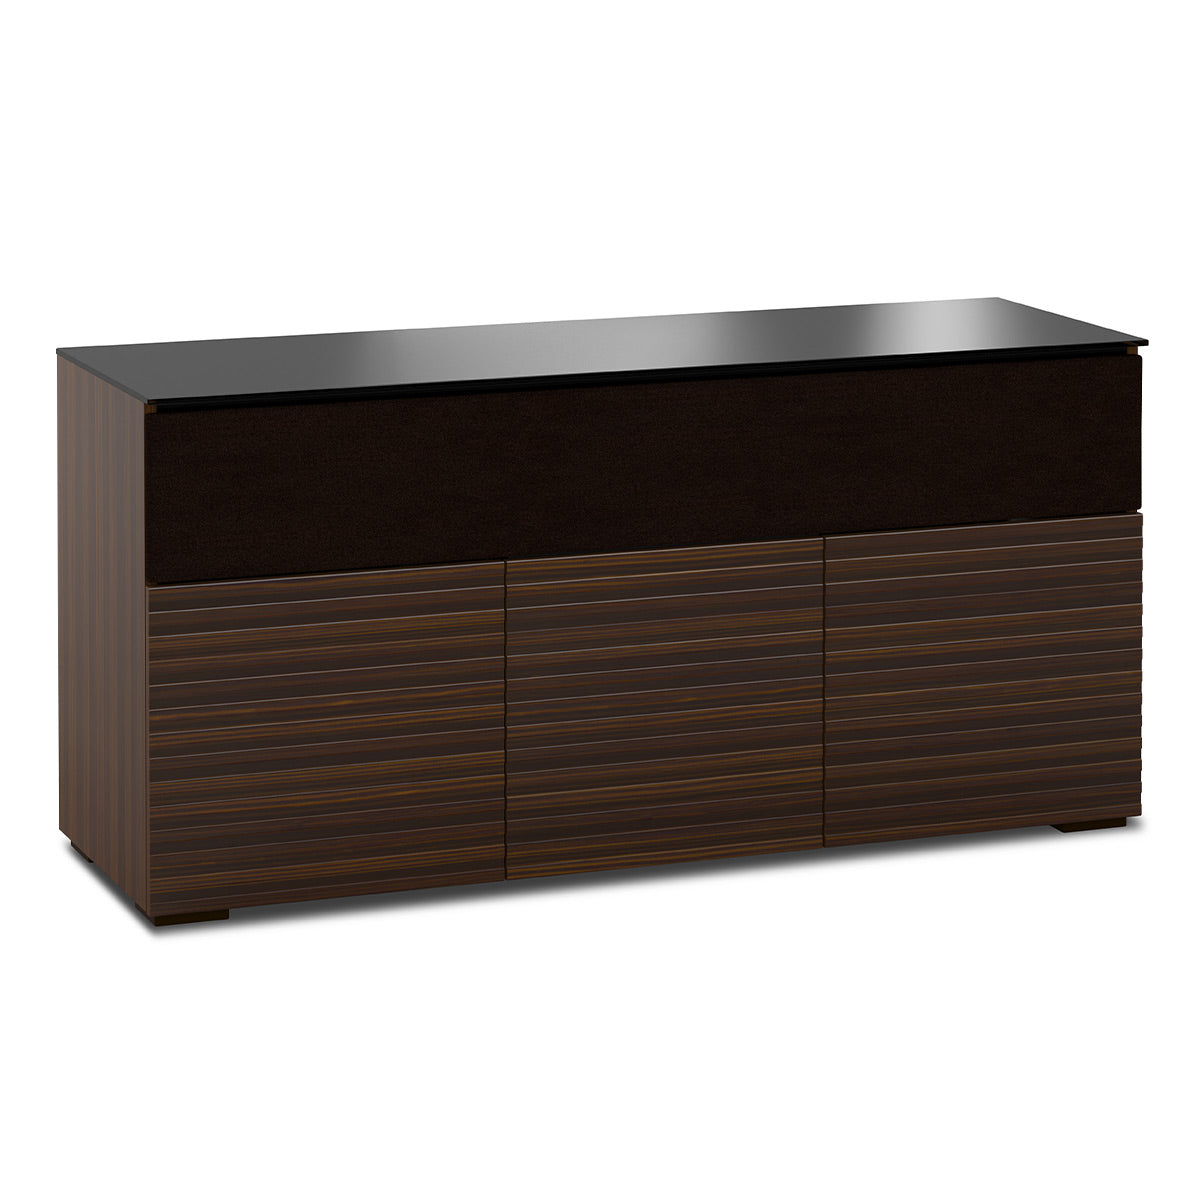 Salamander Chameleon Collection Zurich 339 Triple Speaker Integrated Cabinet (Horizontal Wood Pattern with Black Glass Top)